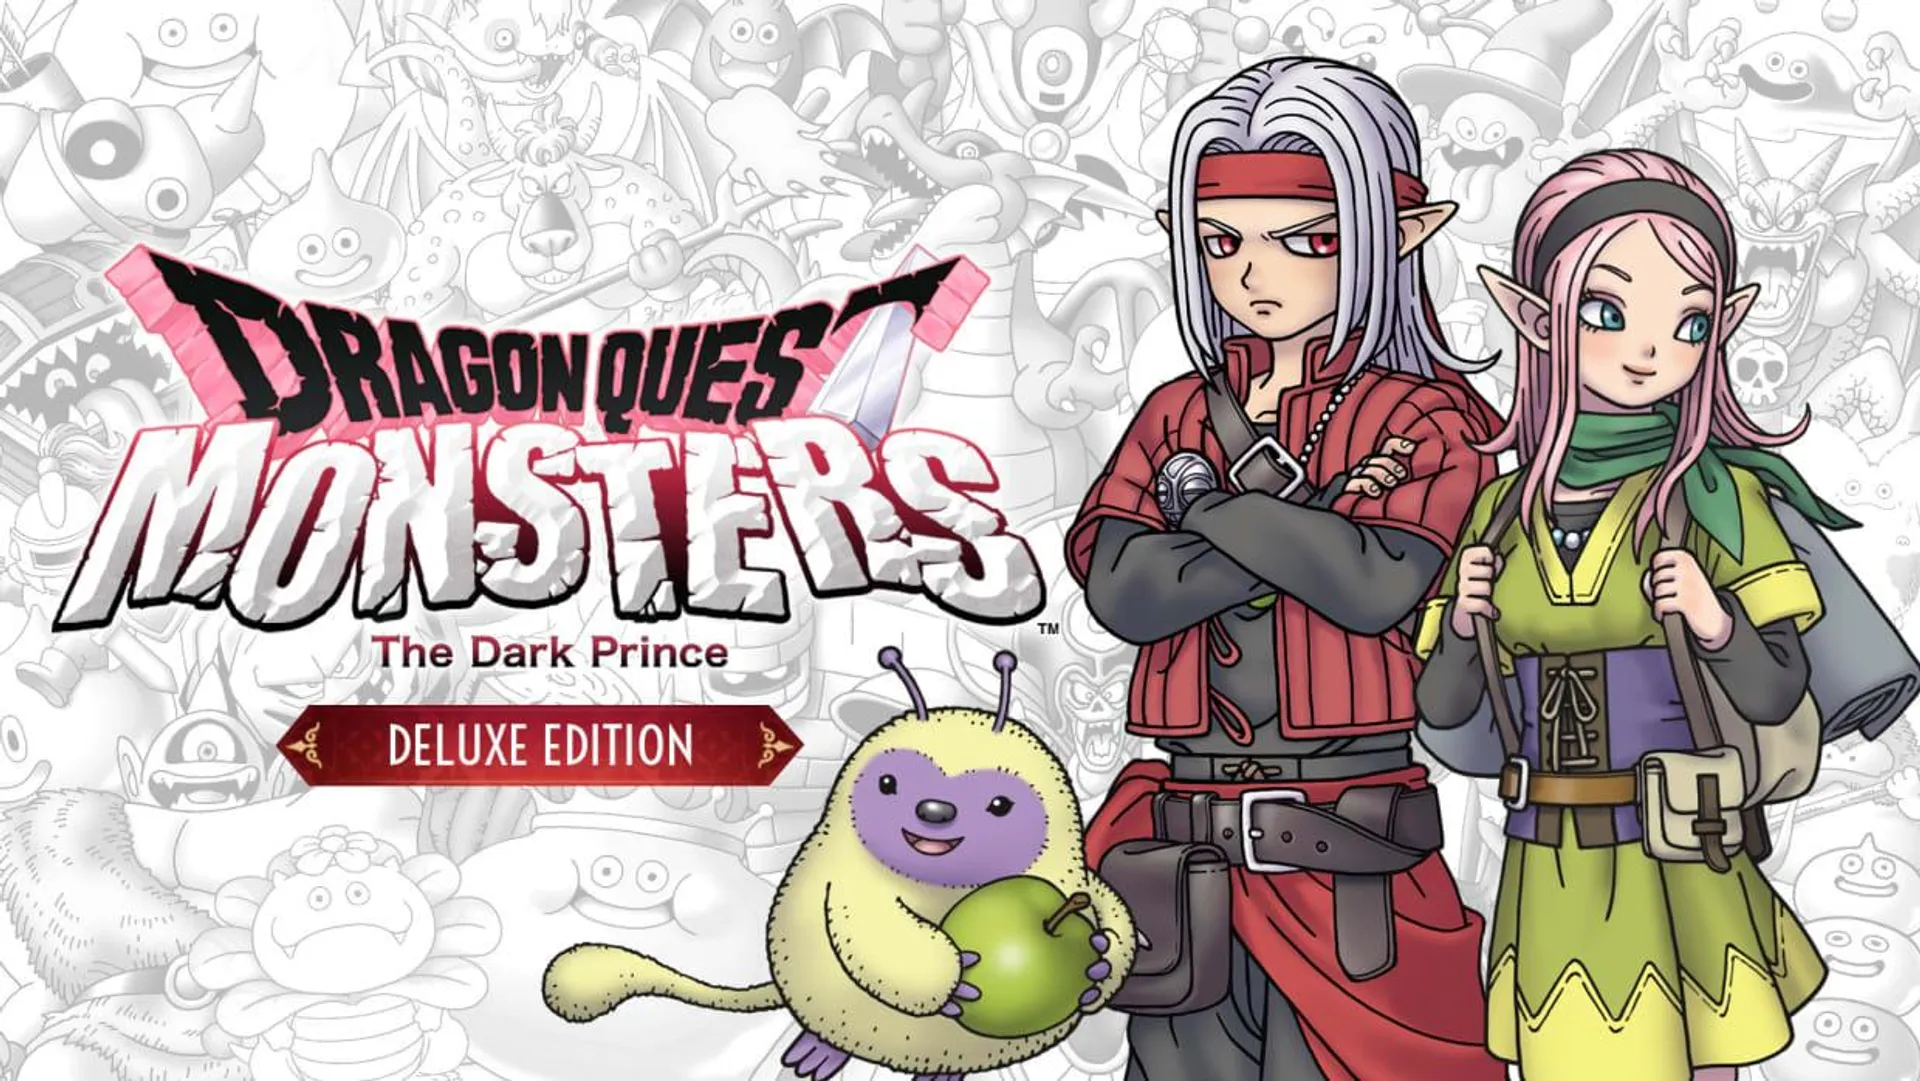 DRAGON QUEST MONSTERS: The Dark Prince Digital Deluxe Edition